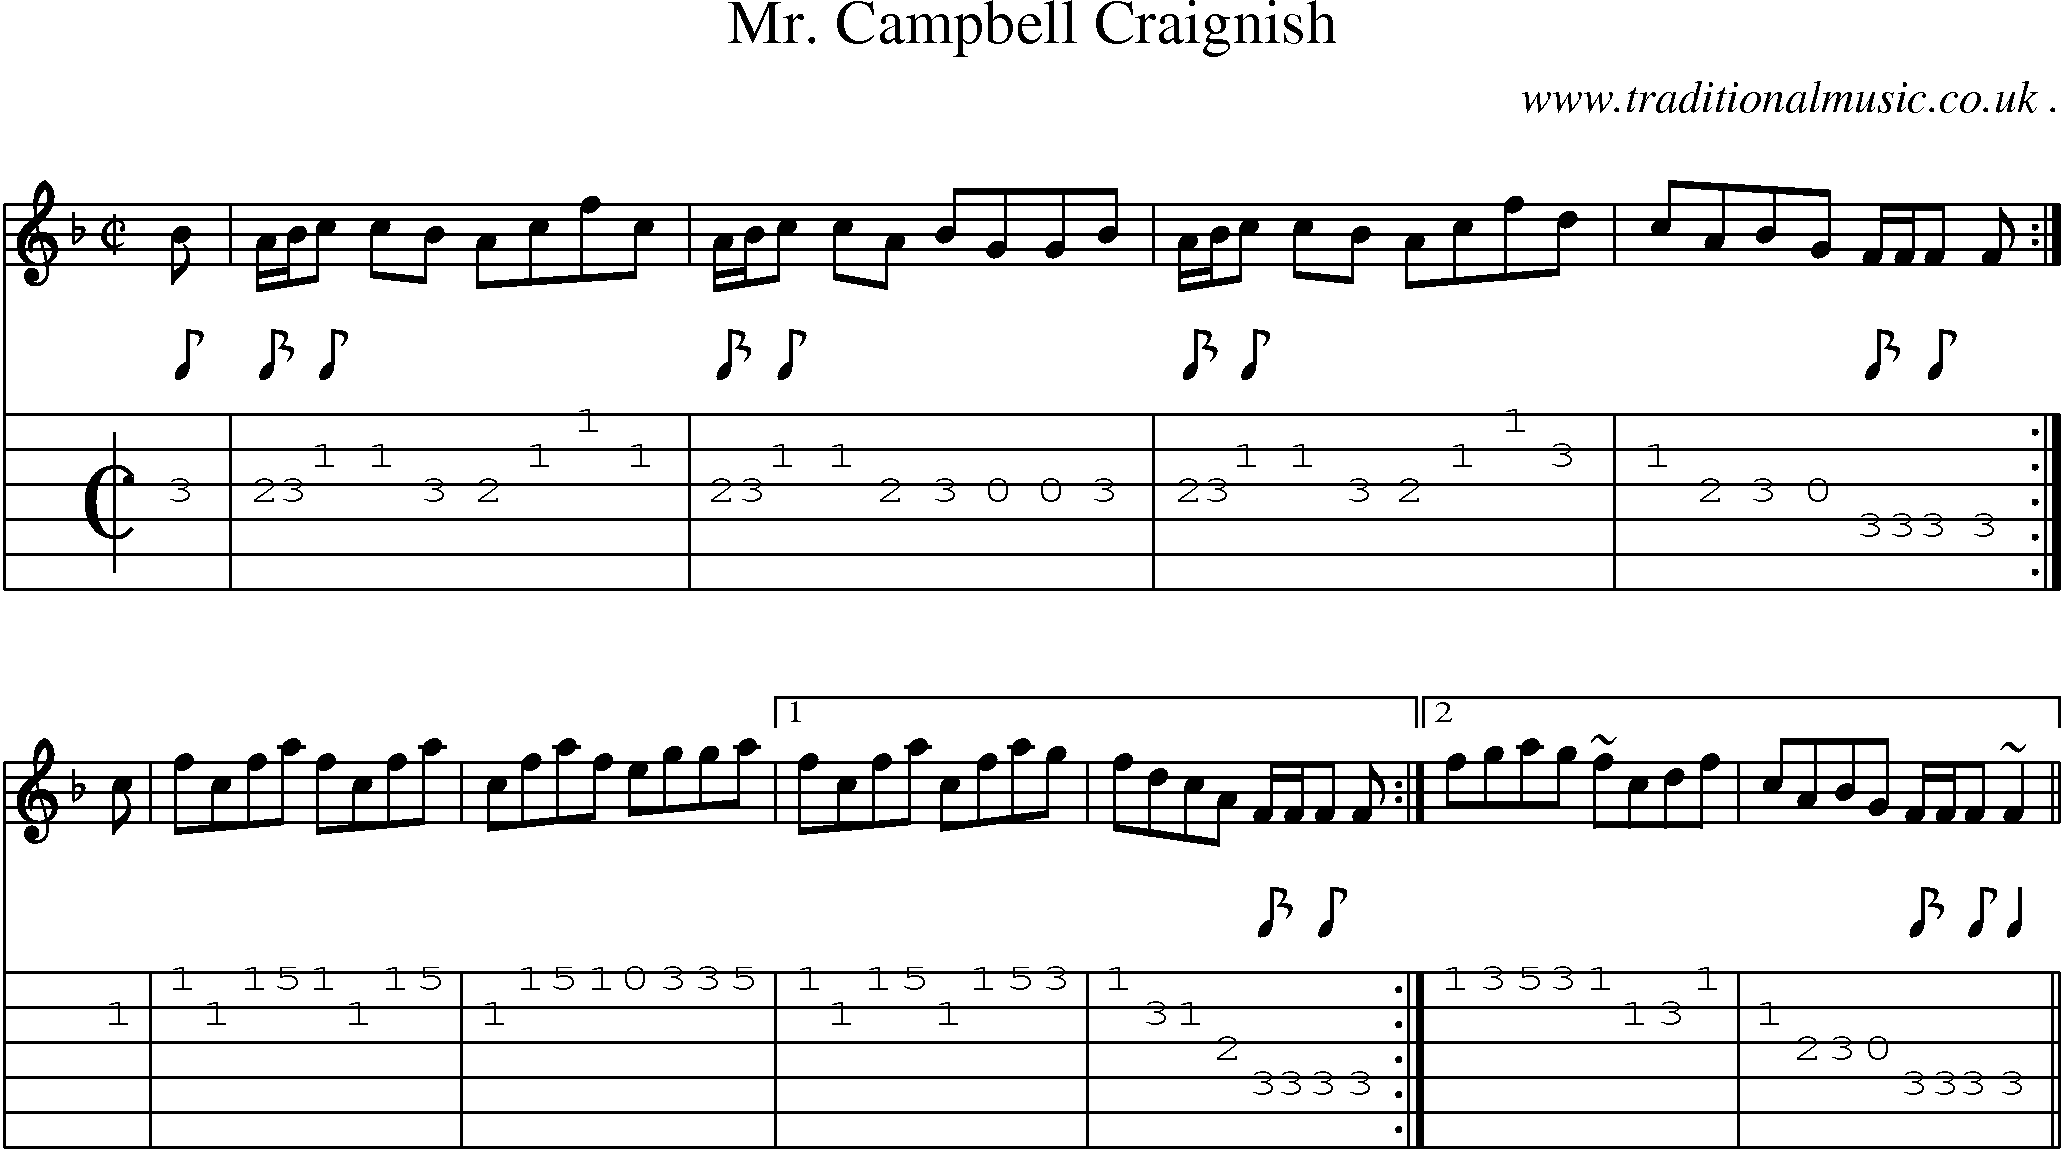 Sheet-music  score, Chords and Guitar Tabs for Mr Campbell Craignish